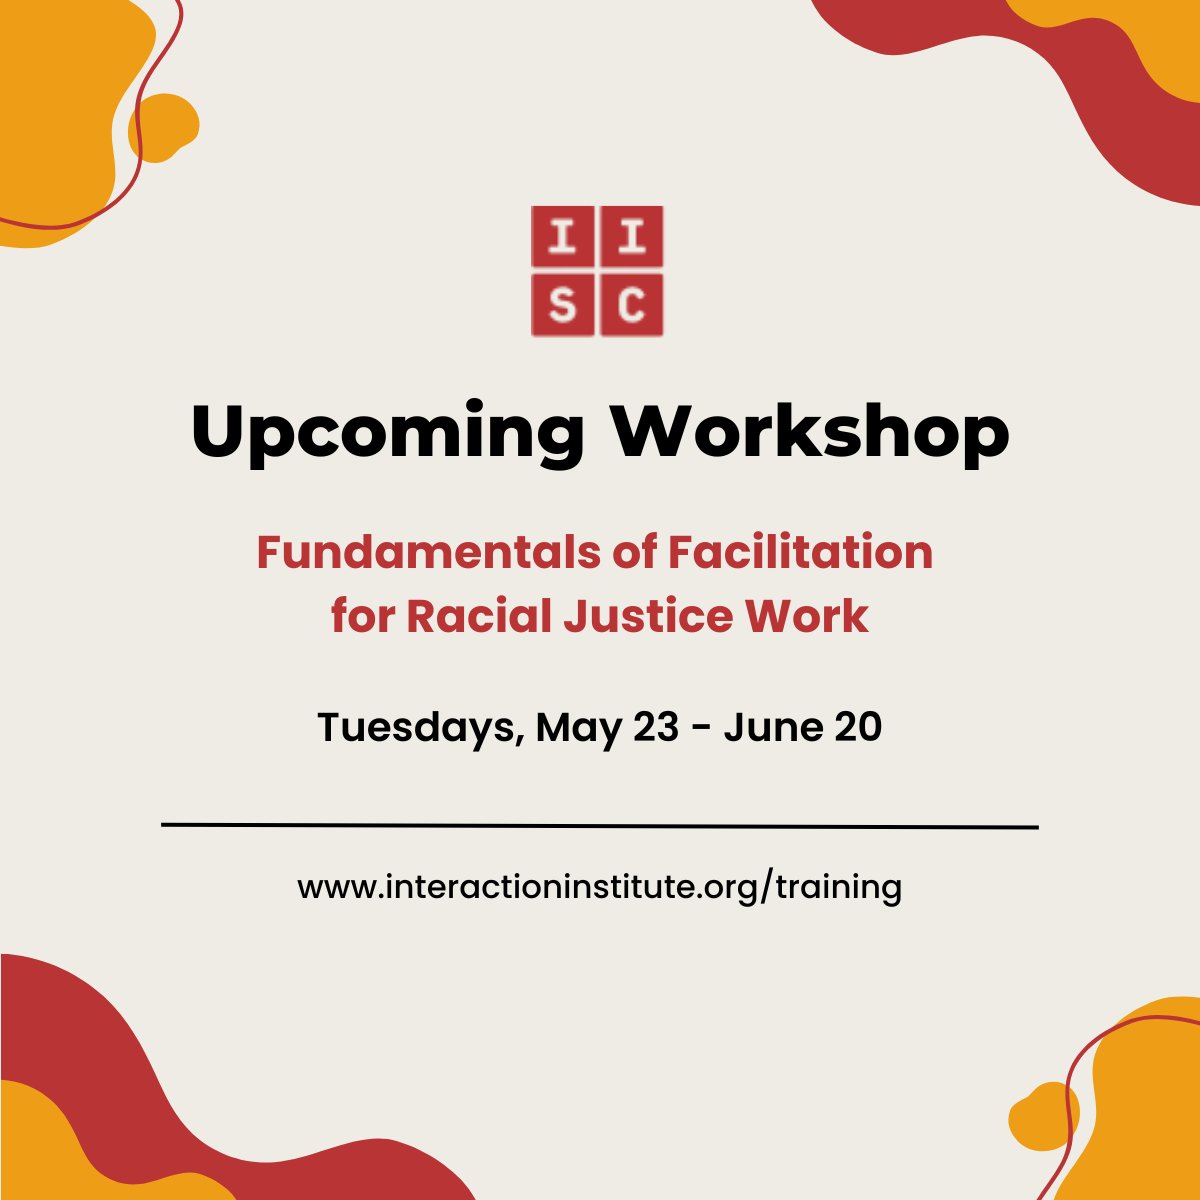 Only a few spots left in our online Spring offering of Fundamentals of Facilitation for Racial Justice Work starting May 23! Check out our website below to learn more and register to join us. 🌻 interactioninstitute.org/trainings/